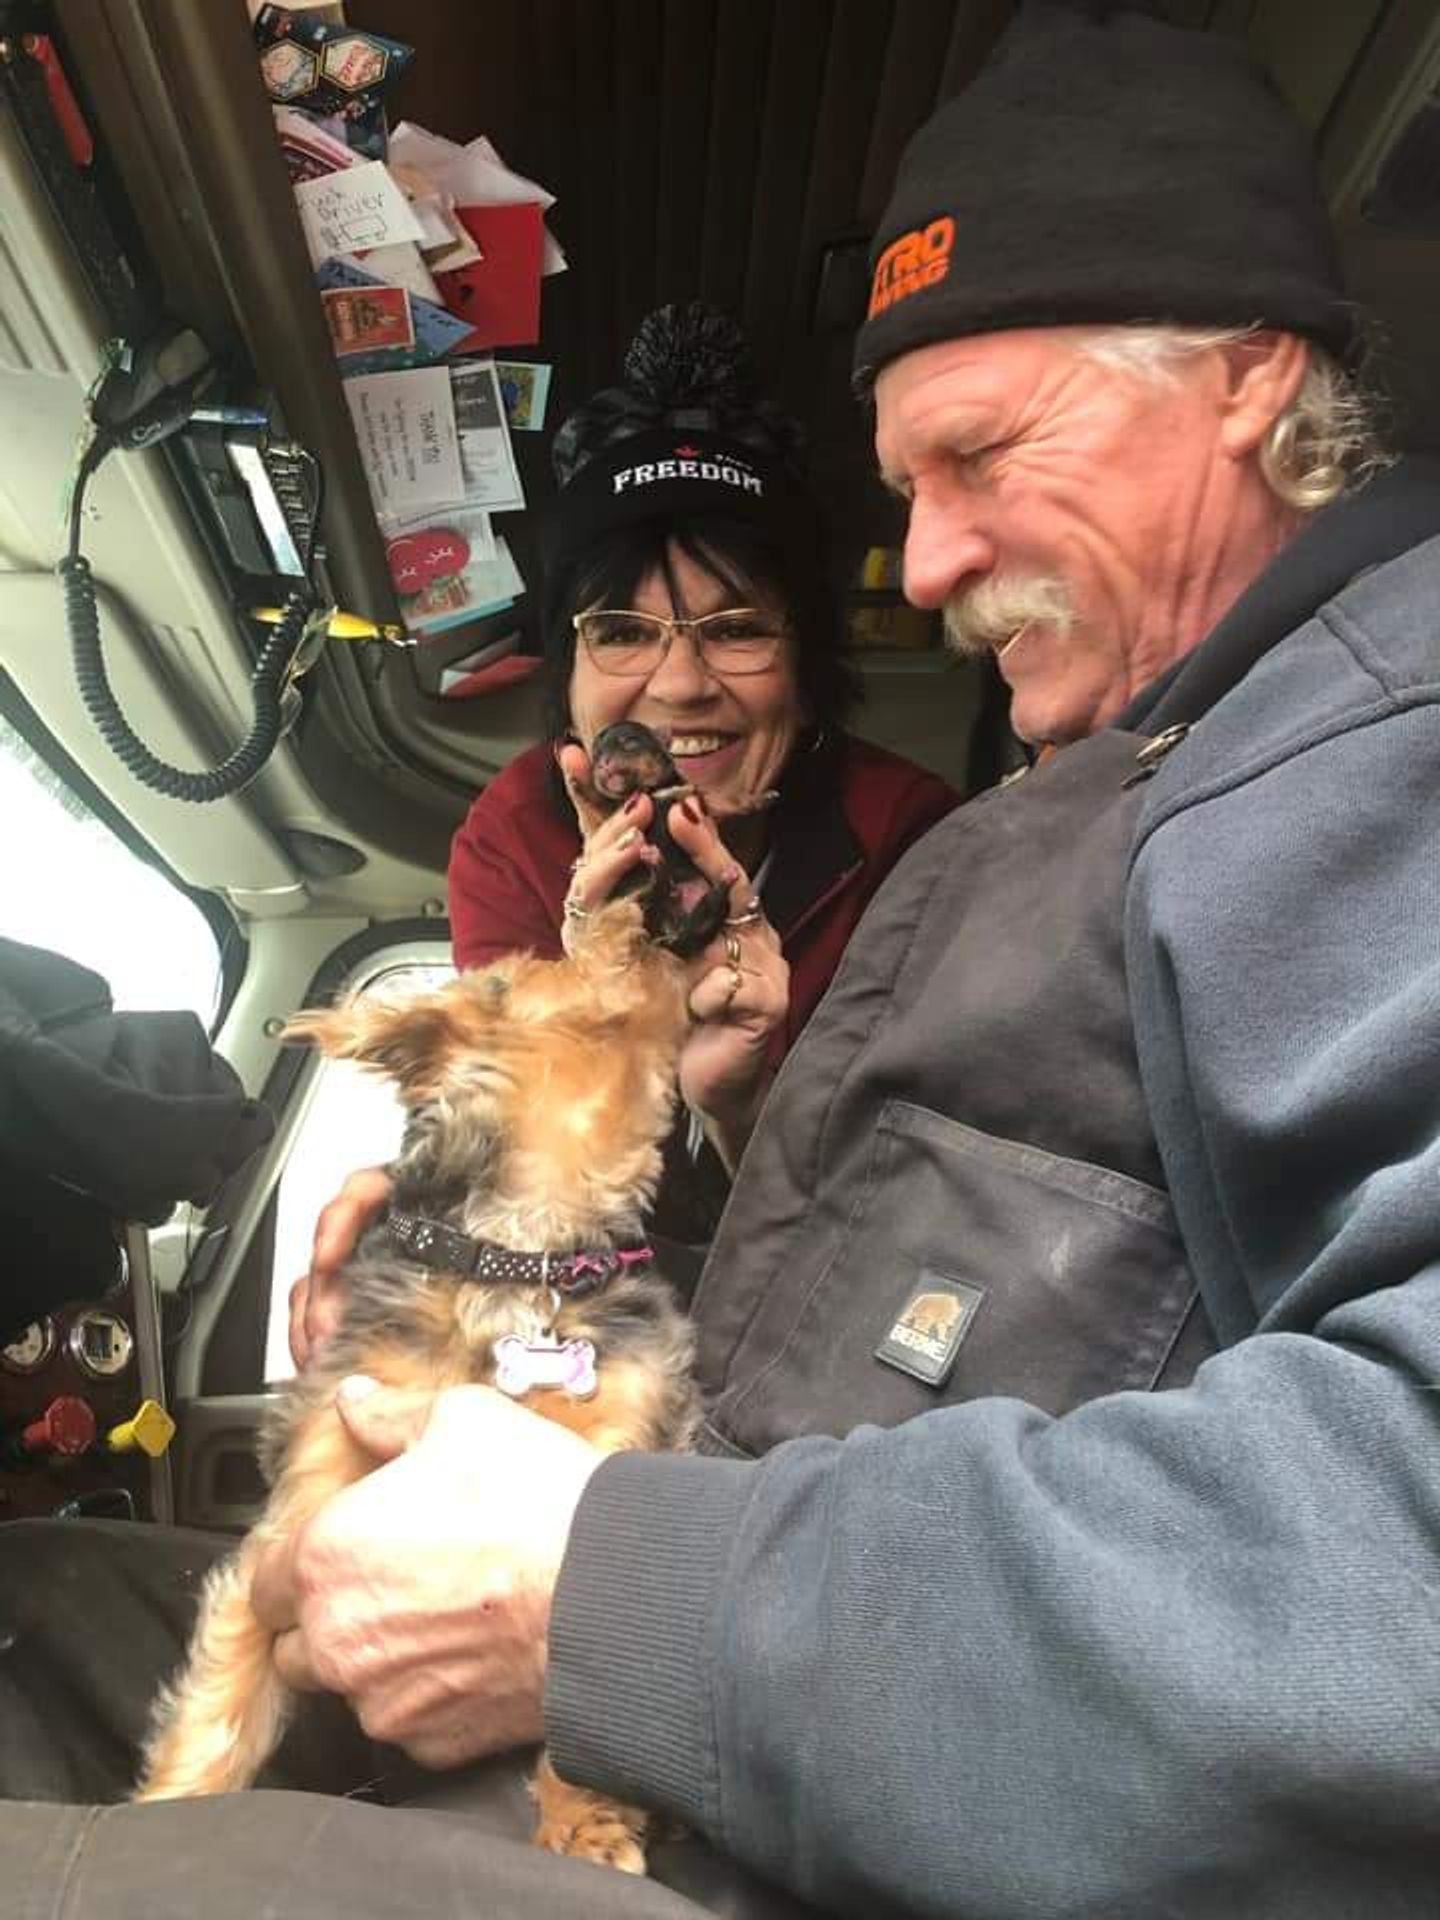 Image of Jake and Lynette Klassen with their Yorkie in the cab of the truck.